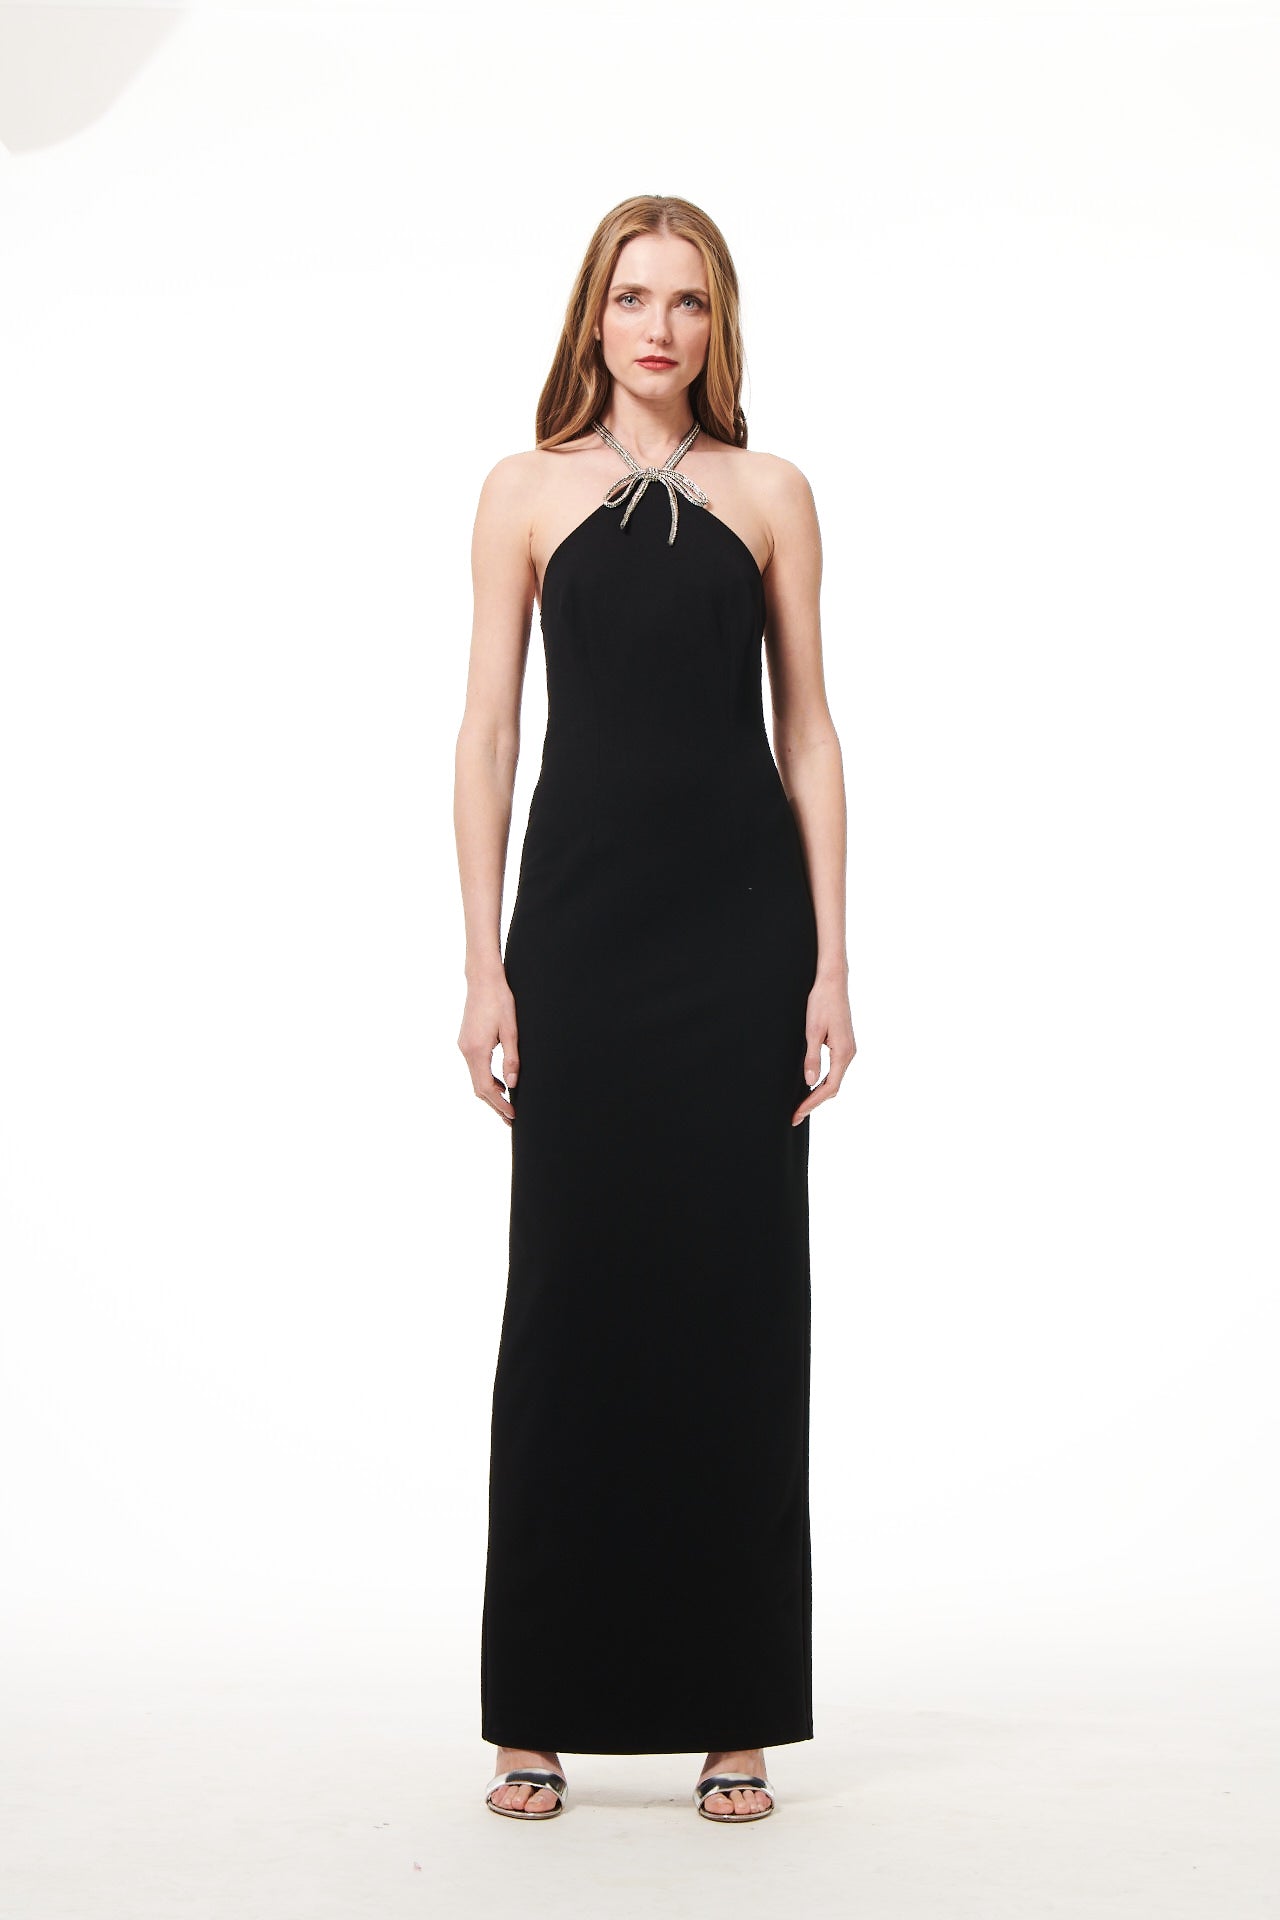 STRETCH CREPE HALTER GOWN WITH JEWELD TIE